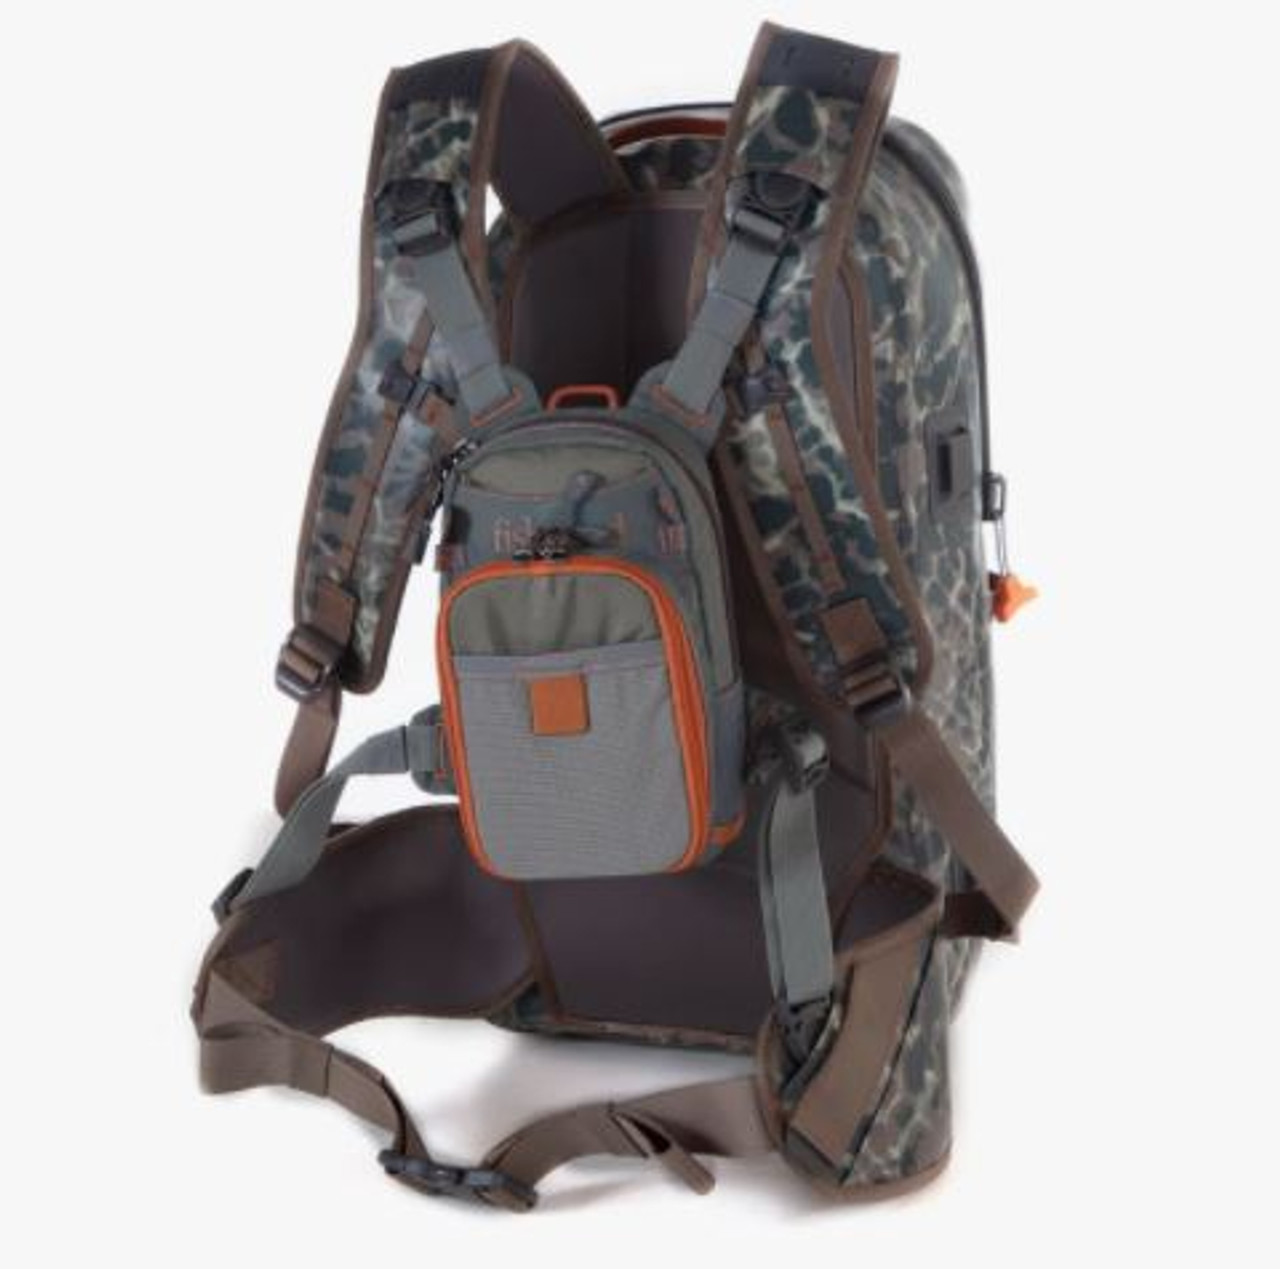 Thunderhead Submersible Backpack - Eco Riverbed Camo - Ramsey Outdoor